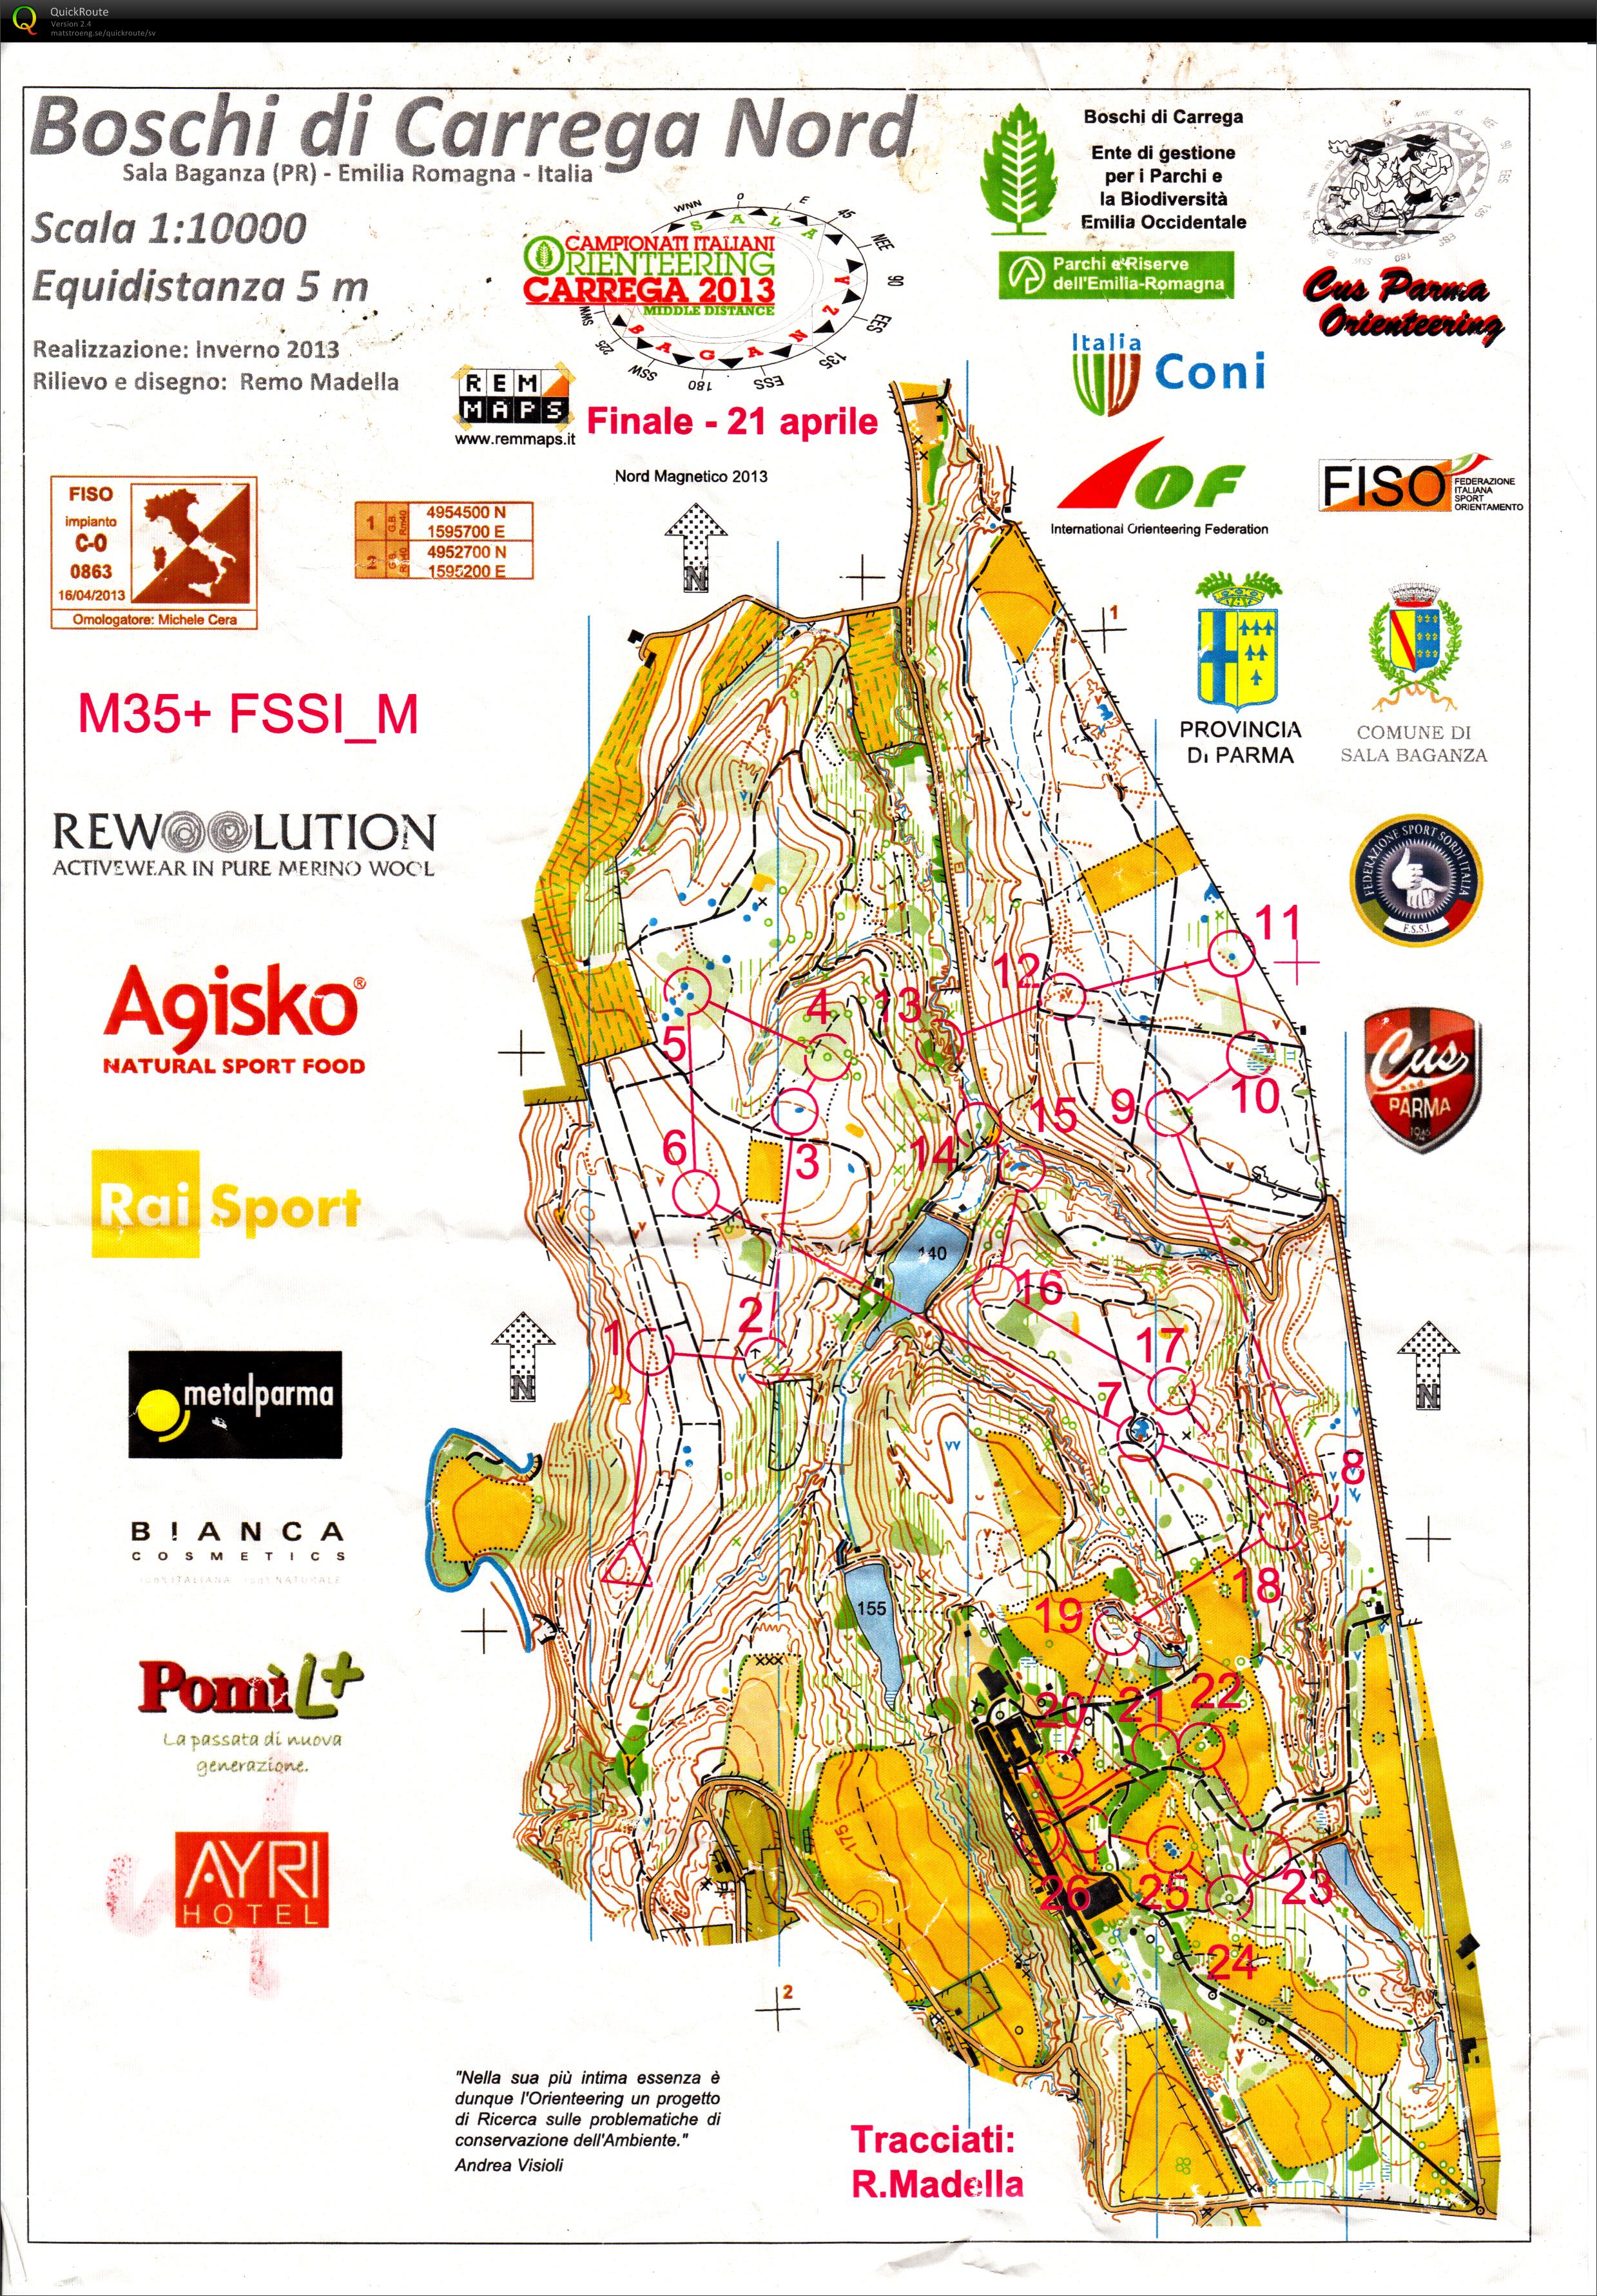 Italian Championship Middle Distance Final (21.04.2013)